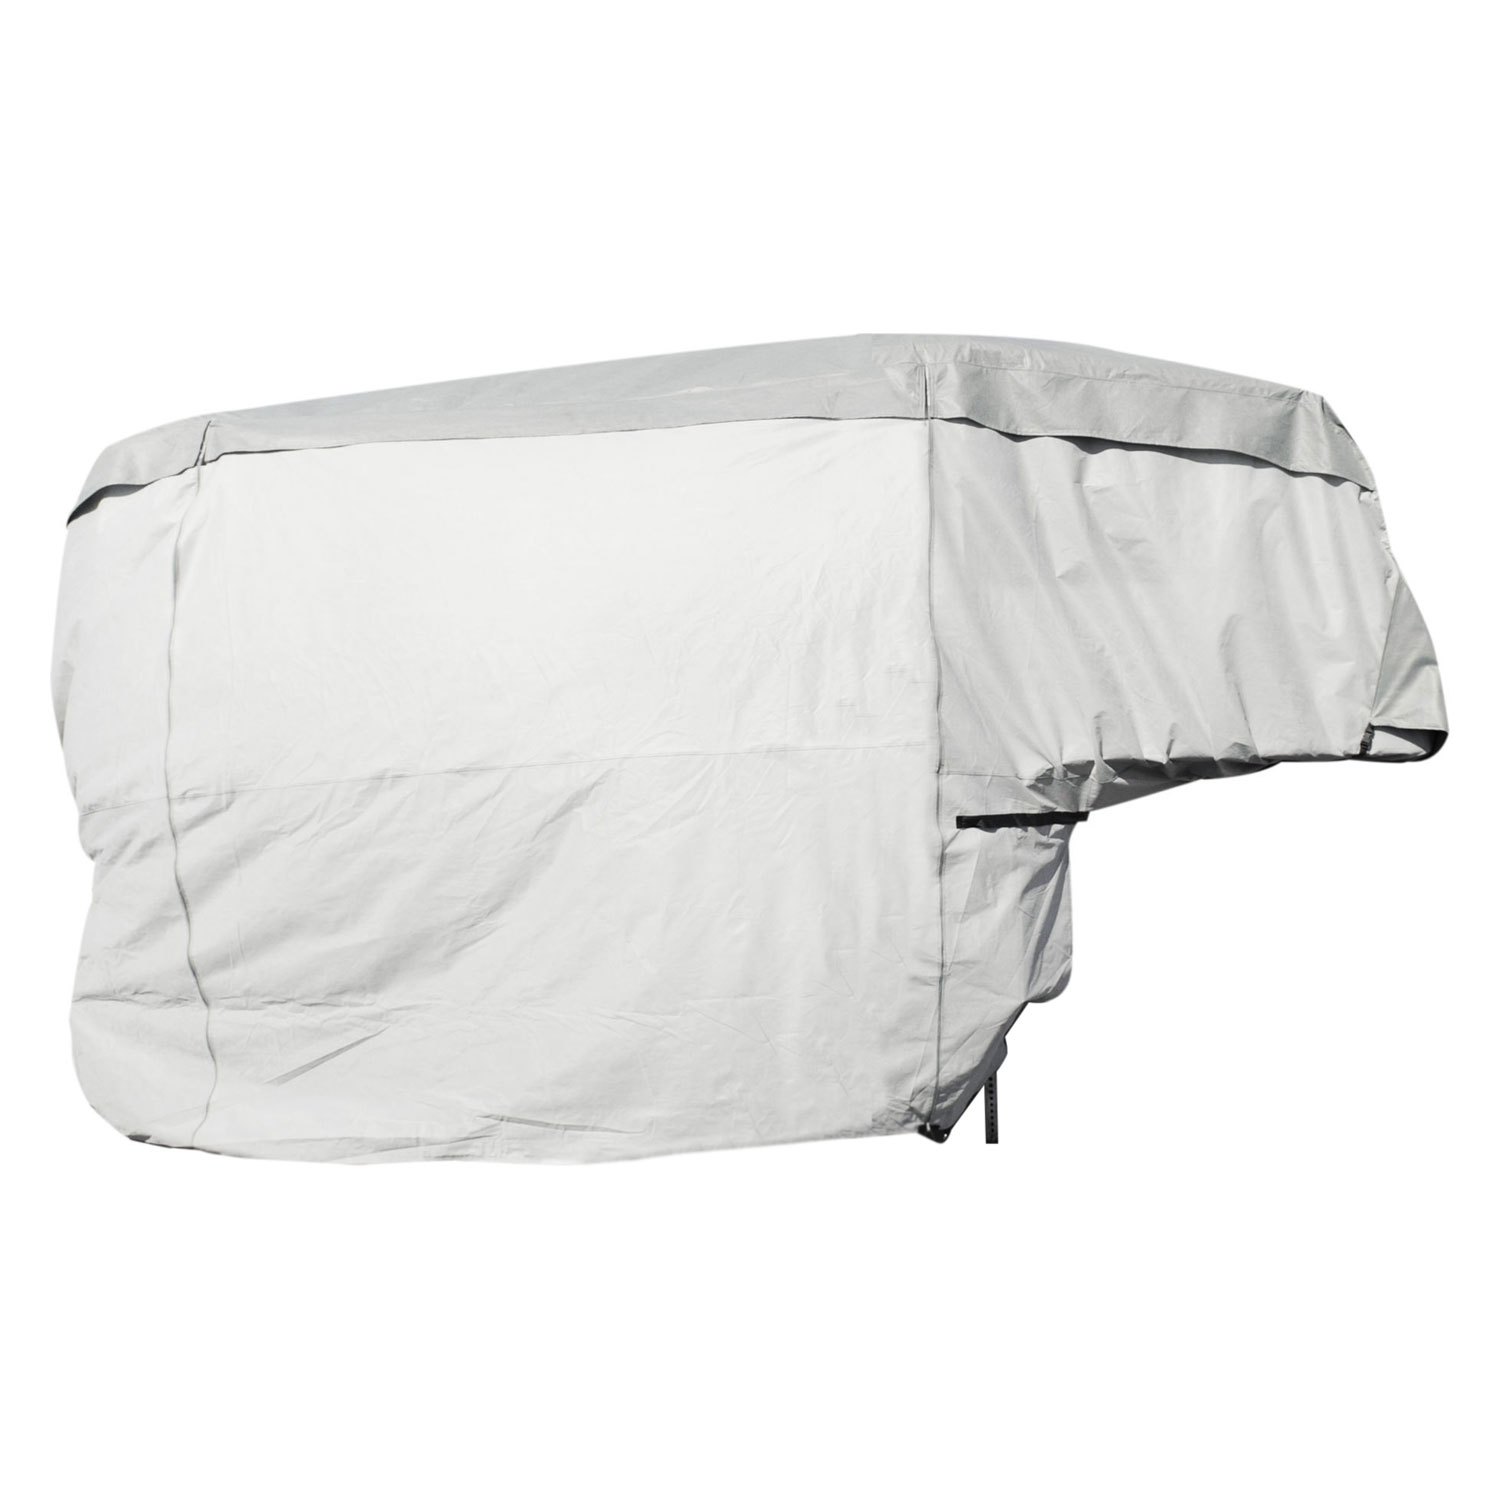 Budge® RVRB-70 - ProTECHtor Truck Camper Cover (Gray, Up to 10